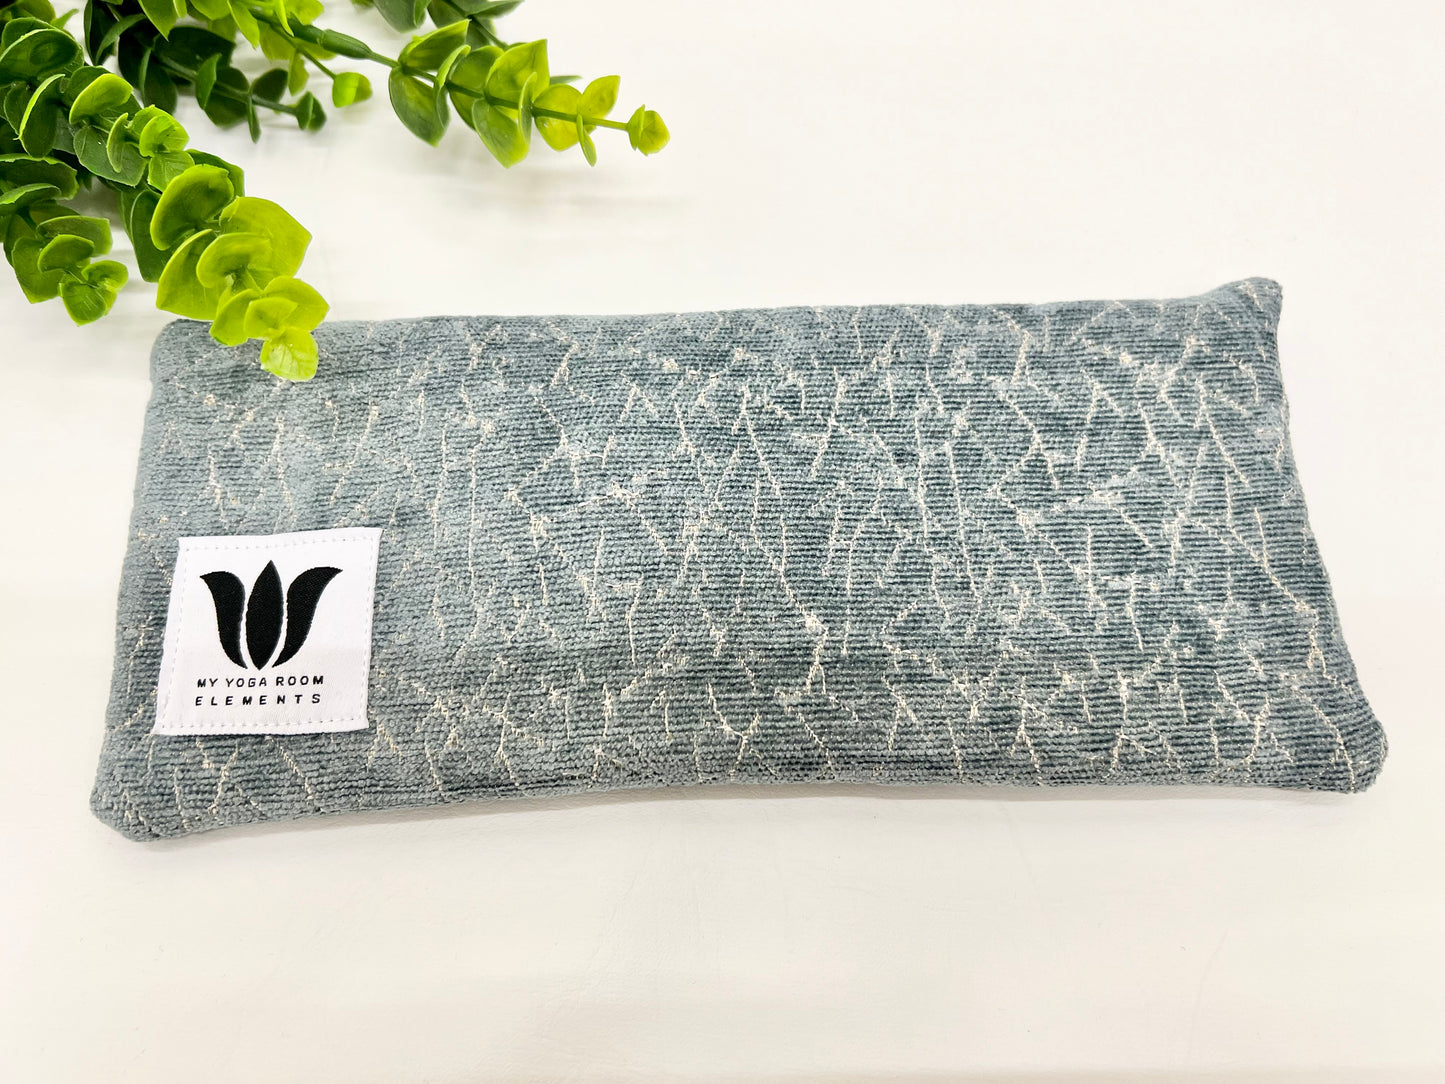 Yoga eye pillow, unscented, therapeutically weighted to soothe eye strain and stress or enhance your savasana. Handcrafted in Canada by My Yoga Room Elements. Sage and silver subtle print and bamboo fabric.